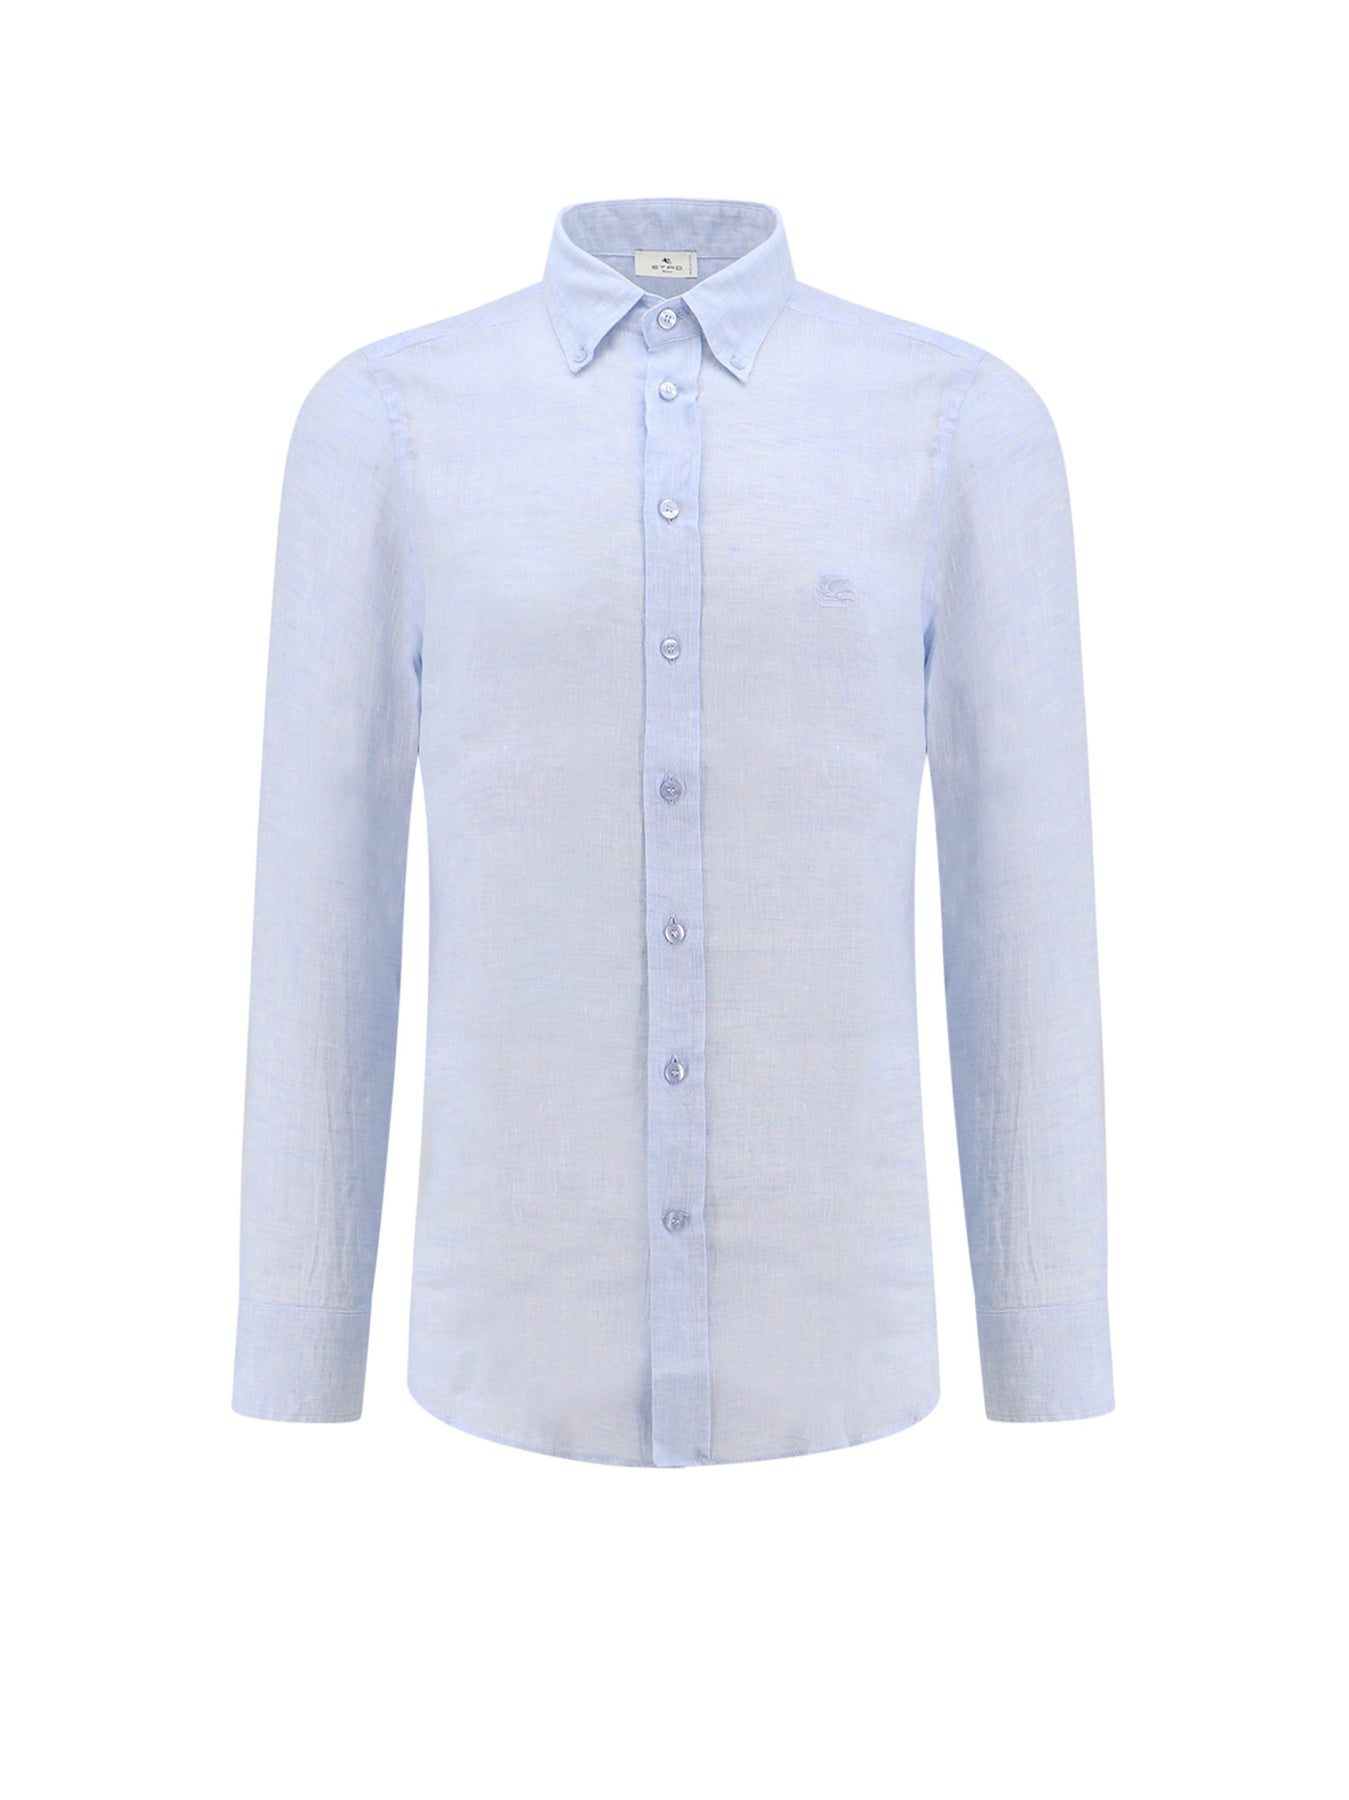 Linen shirt with embroidered Pegaso logo - 1